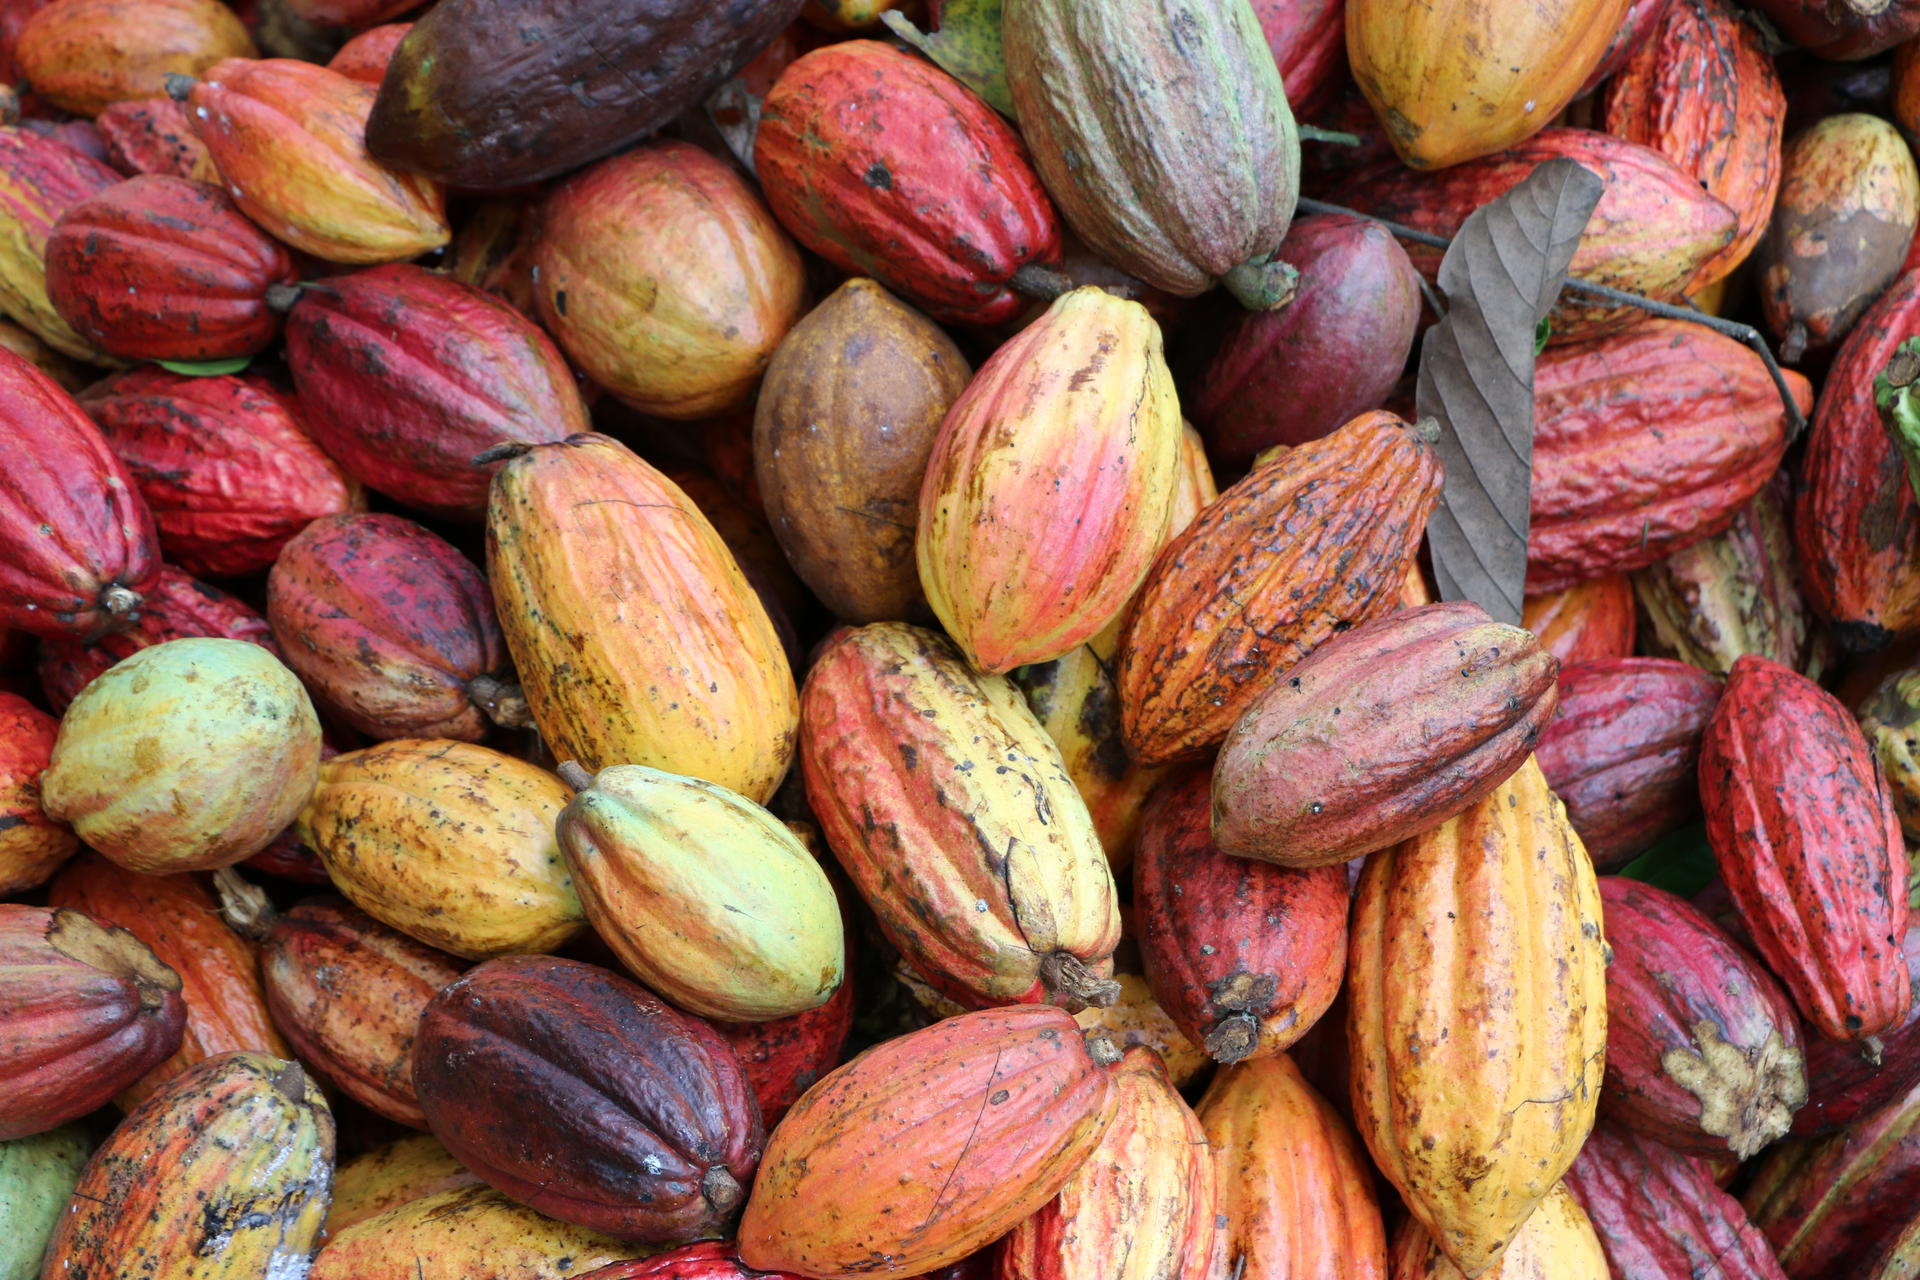 To'ak uses cacao beans from various kinds of cacao fruits to make its chocolate.